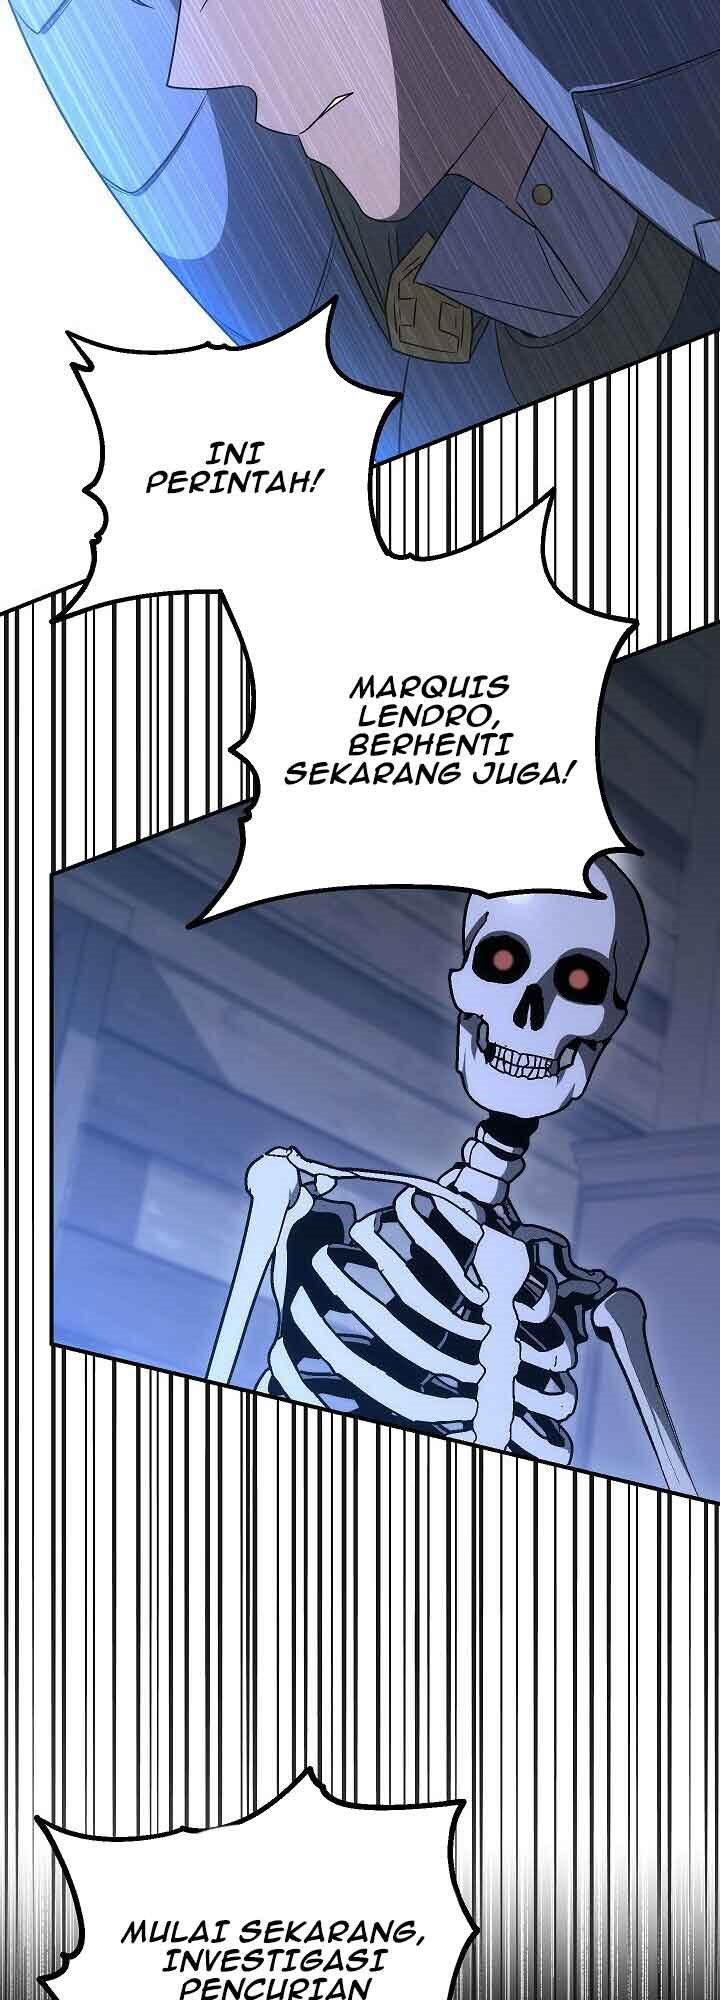 Skeleton Soldier Couldn’t Protect the Dungeon Chapter 151